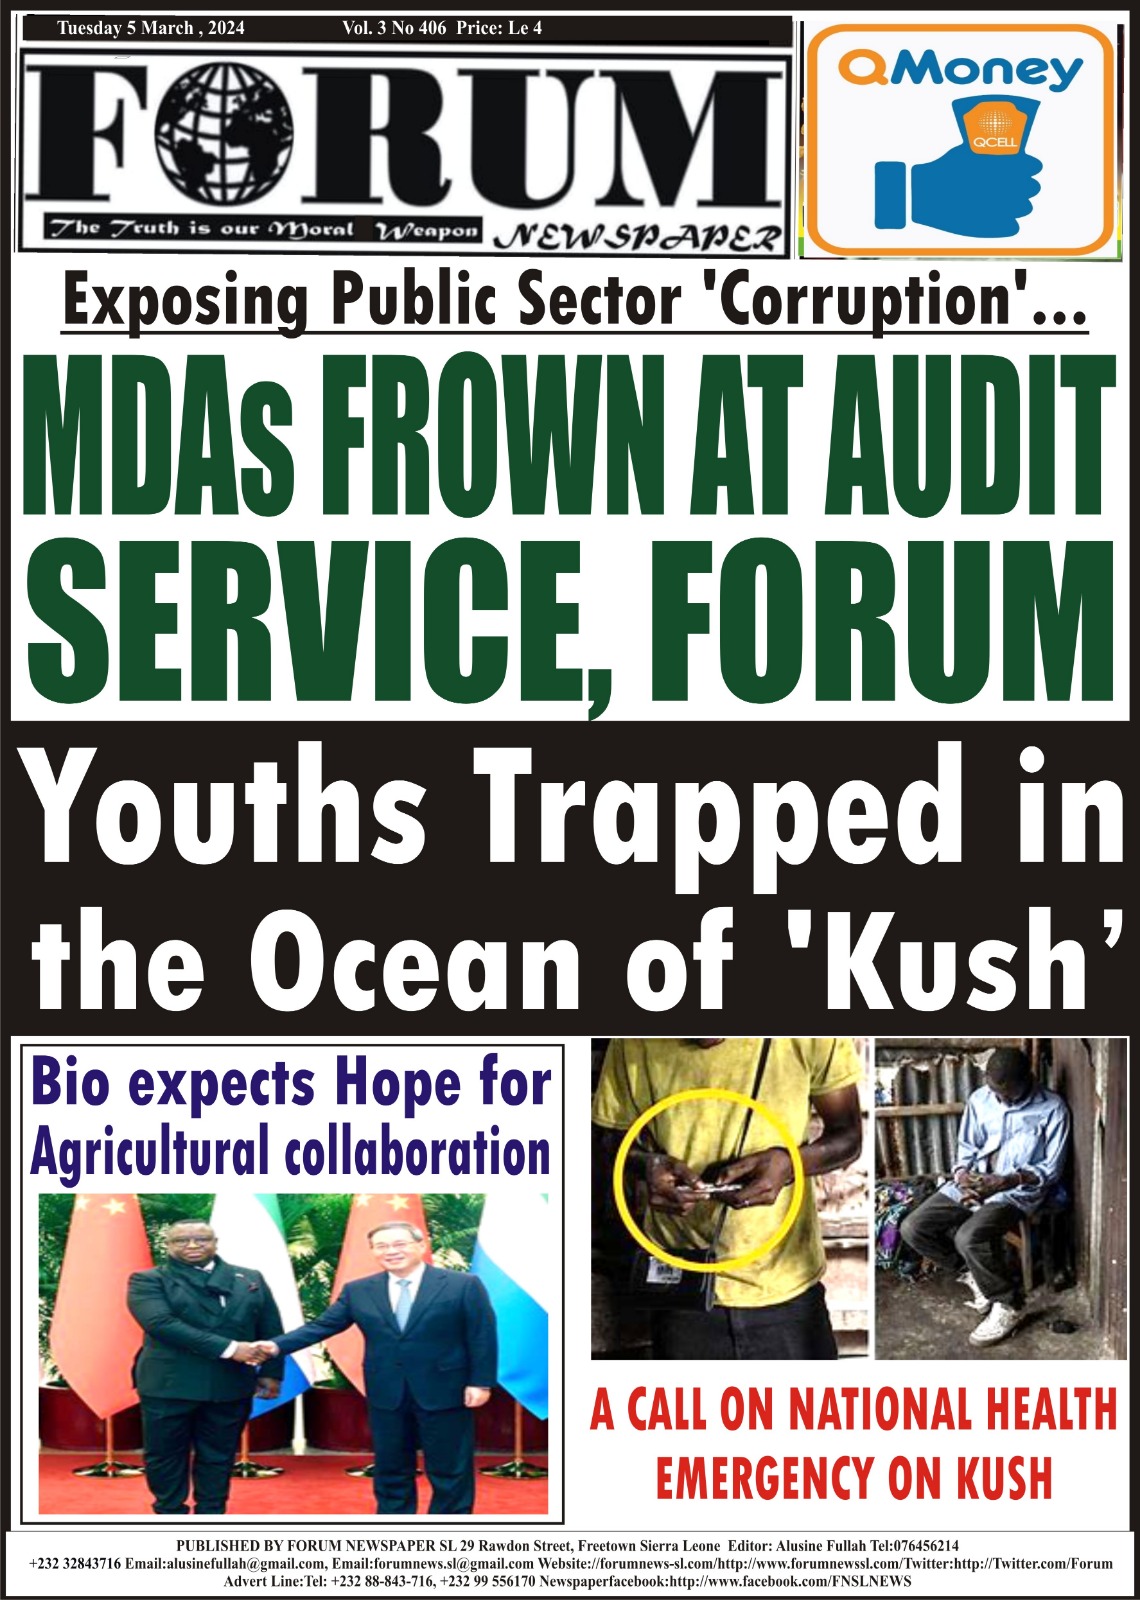 Exposing Public Sector ‘Corruption’… MDAs FROWN AT AUDIT SERVICE, FORUM